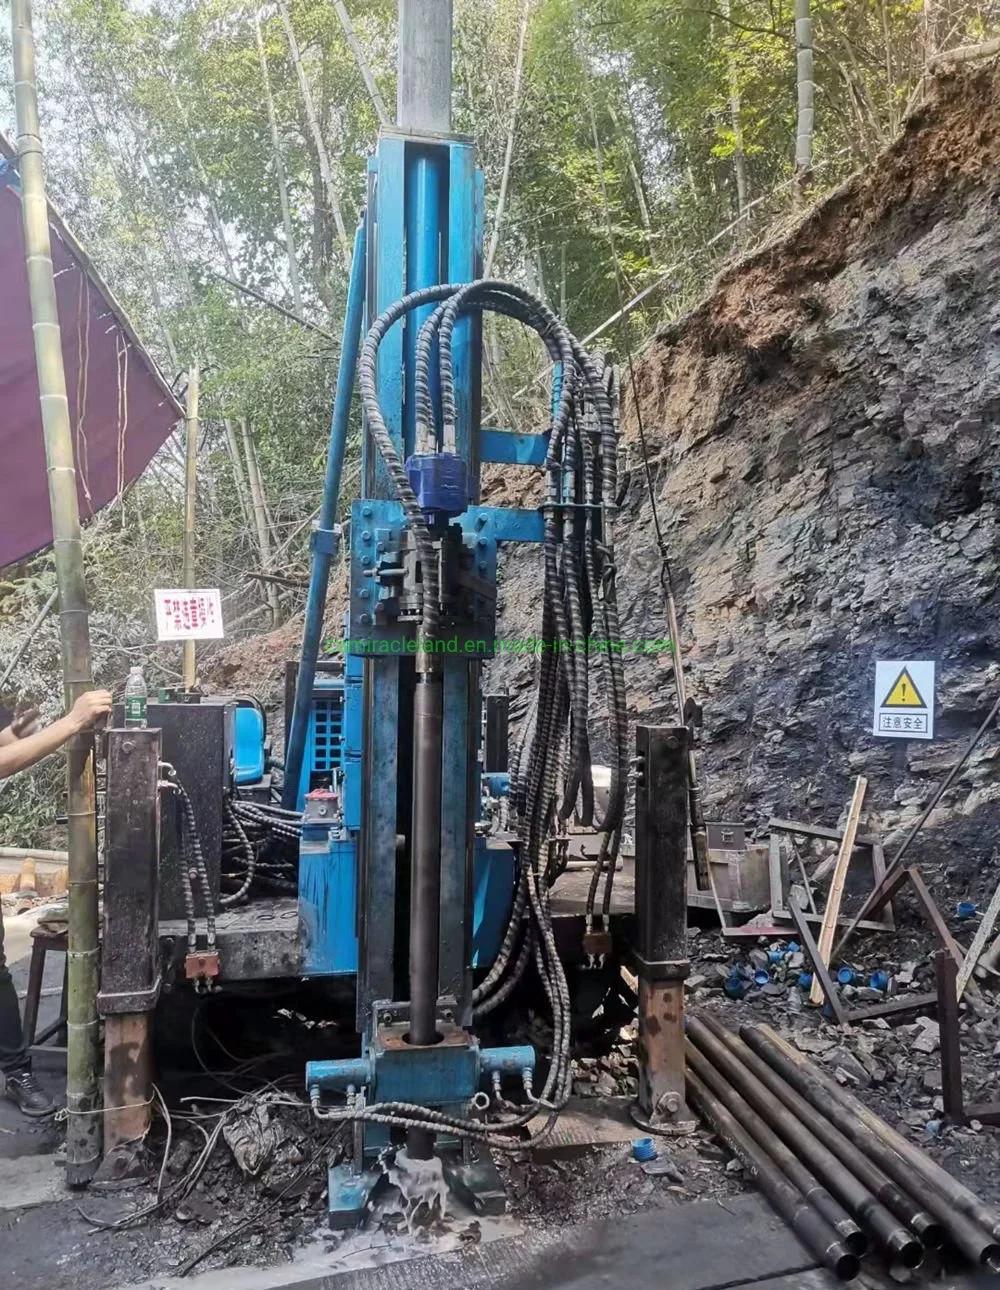 Ydx-300 Portable Full Hydraulic Mineral Exploration Wireline Core Drilling Rig